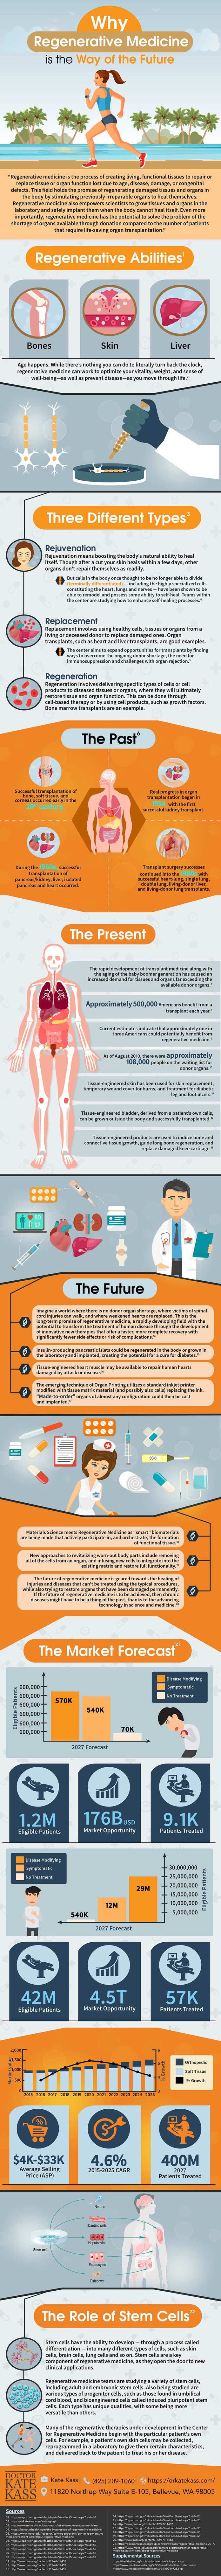 Why Regenerative Medicine is the way of the future